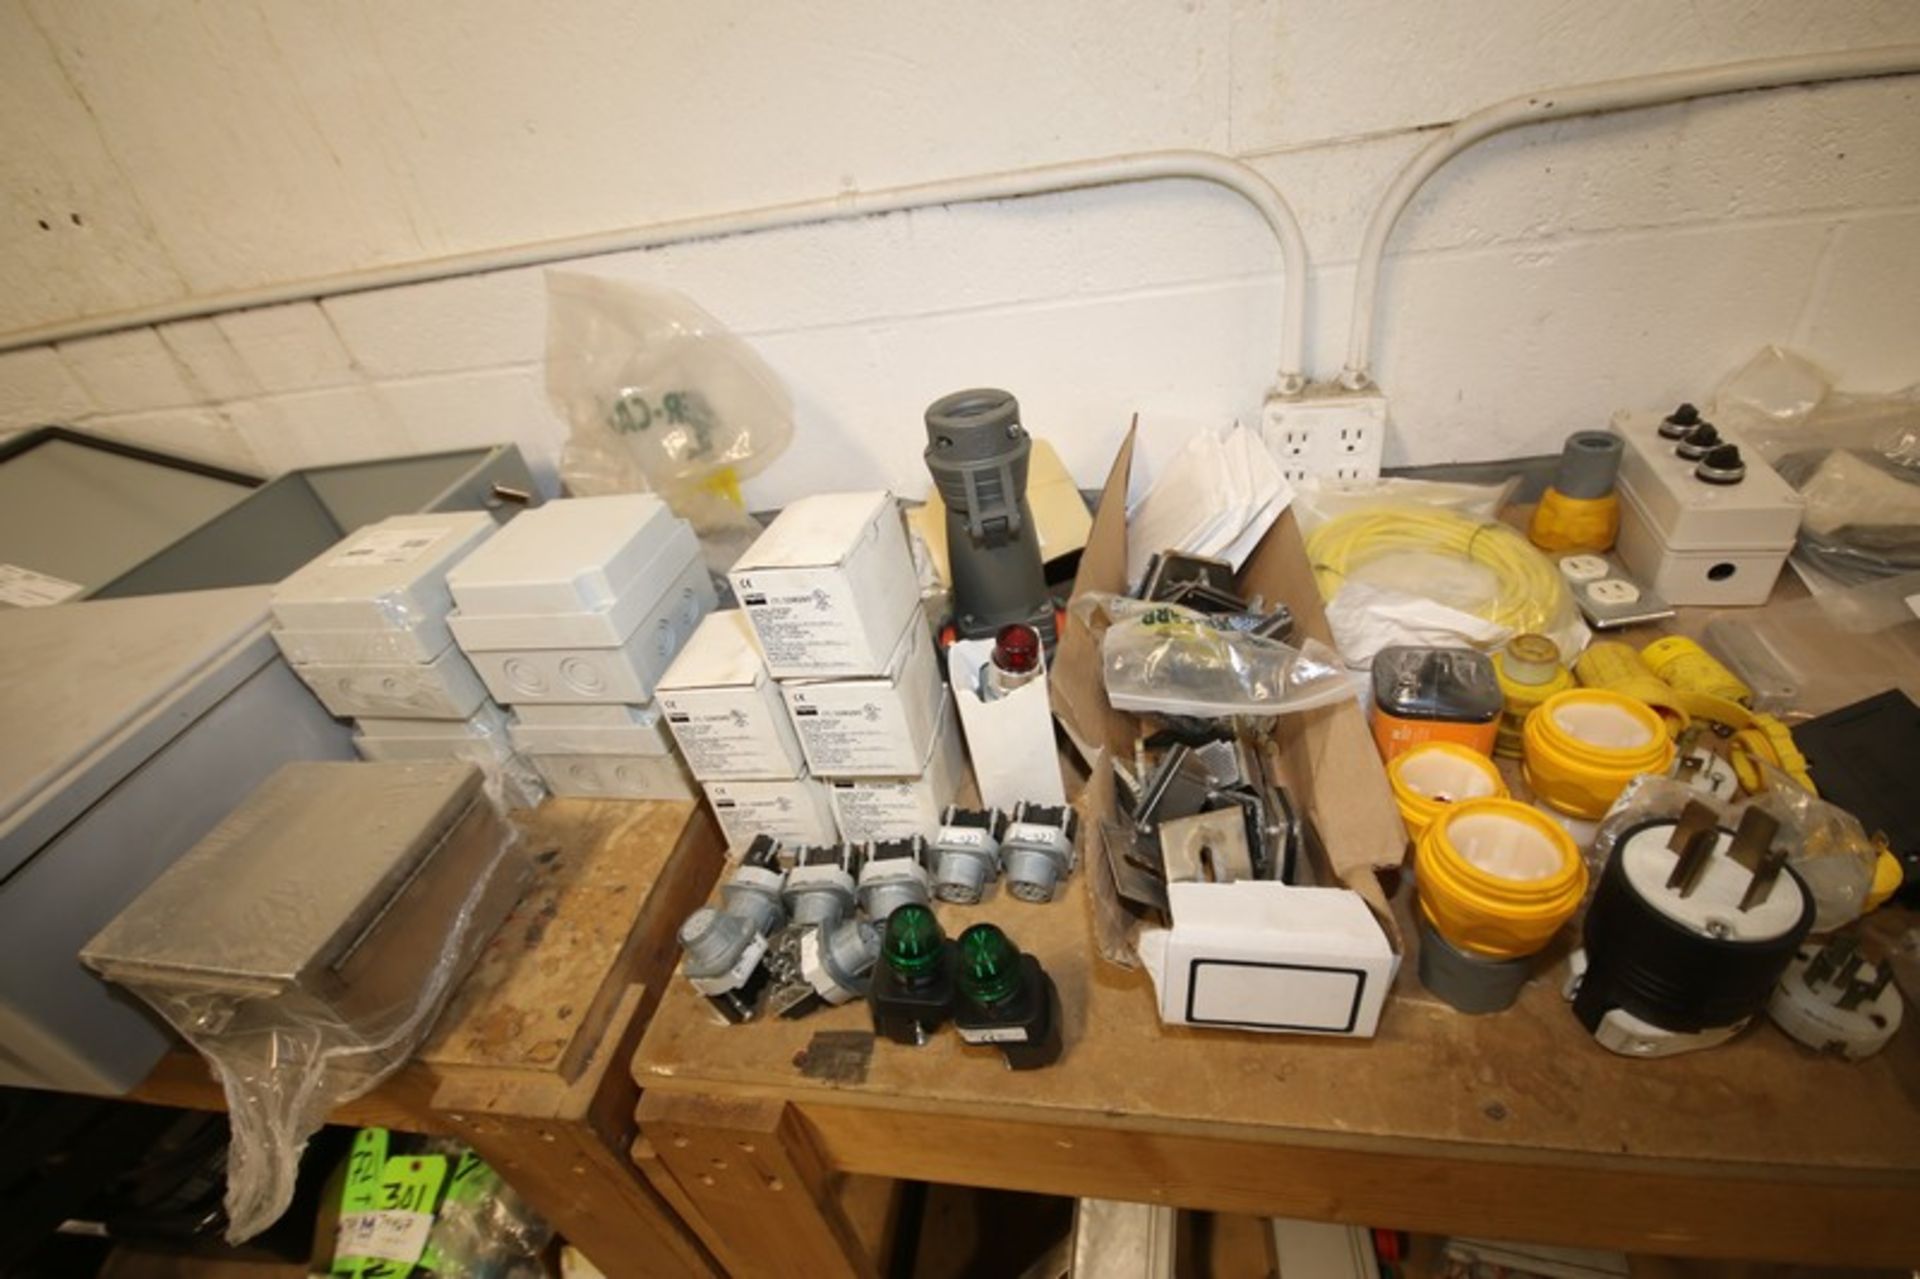 Lot of Assorted Electrical Including Boxes, Switches, Plugs, Breakers, Honeywell Spark Switch & - Image 2 of 4